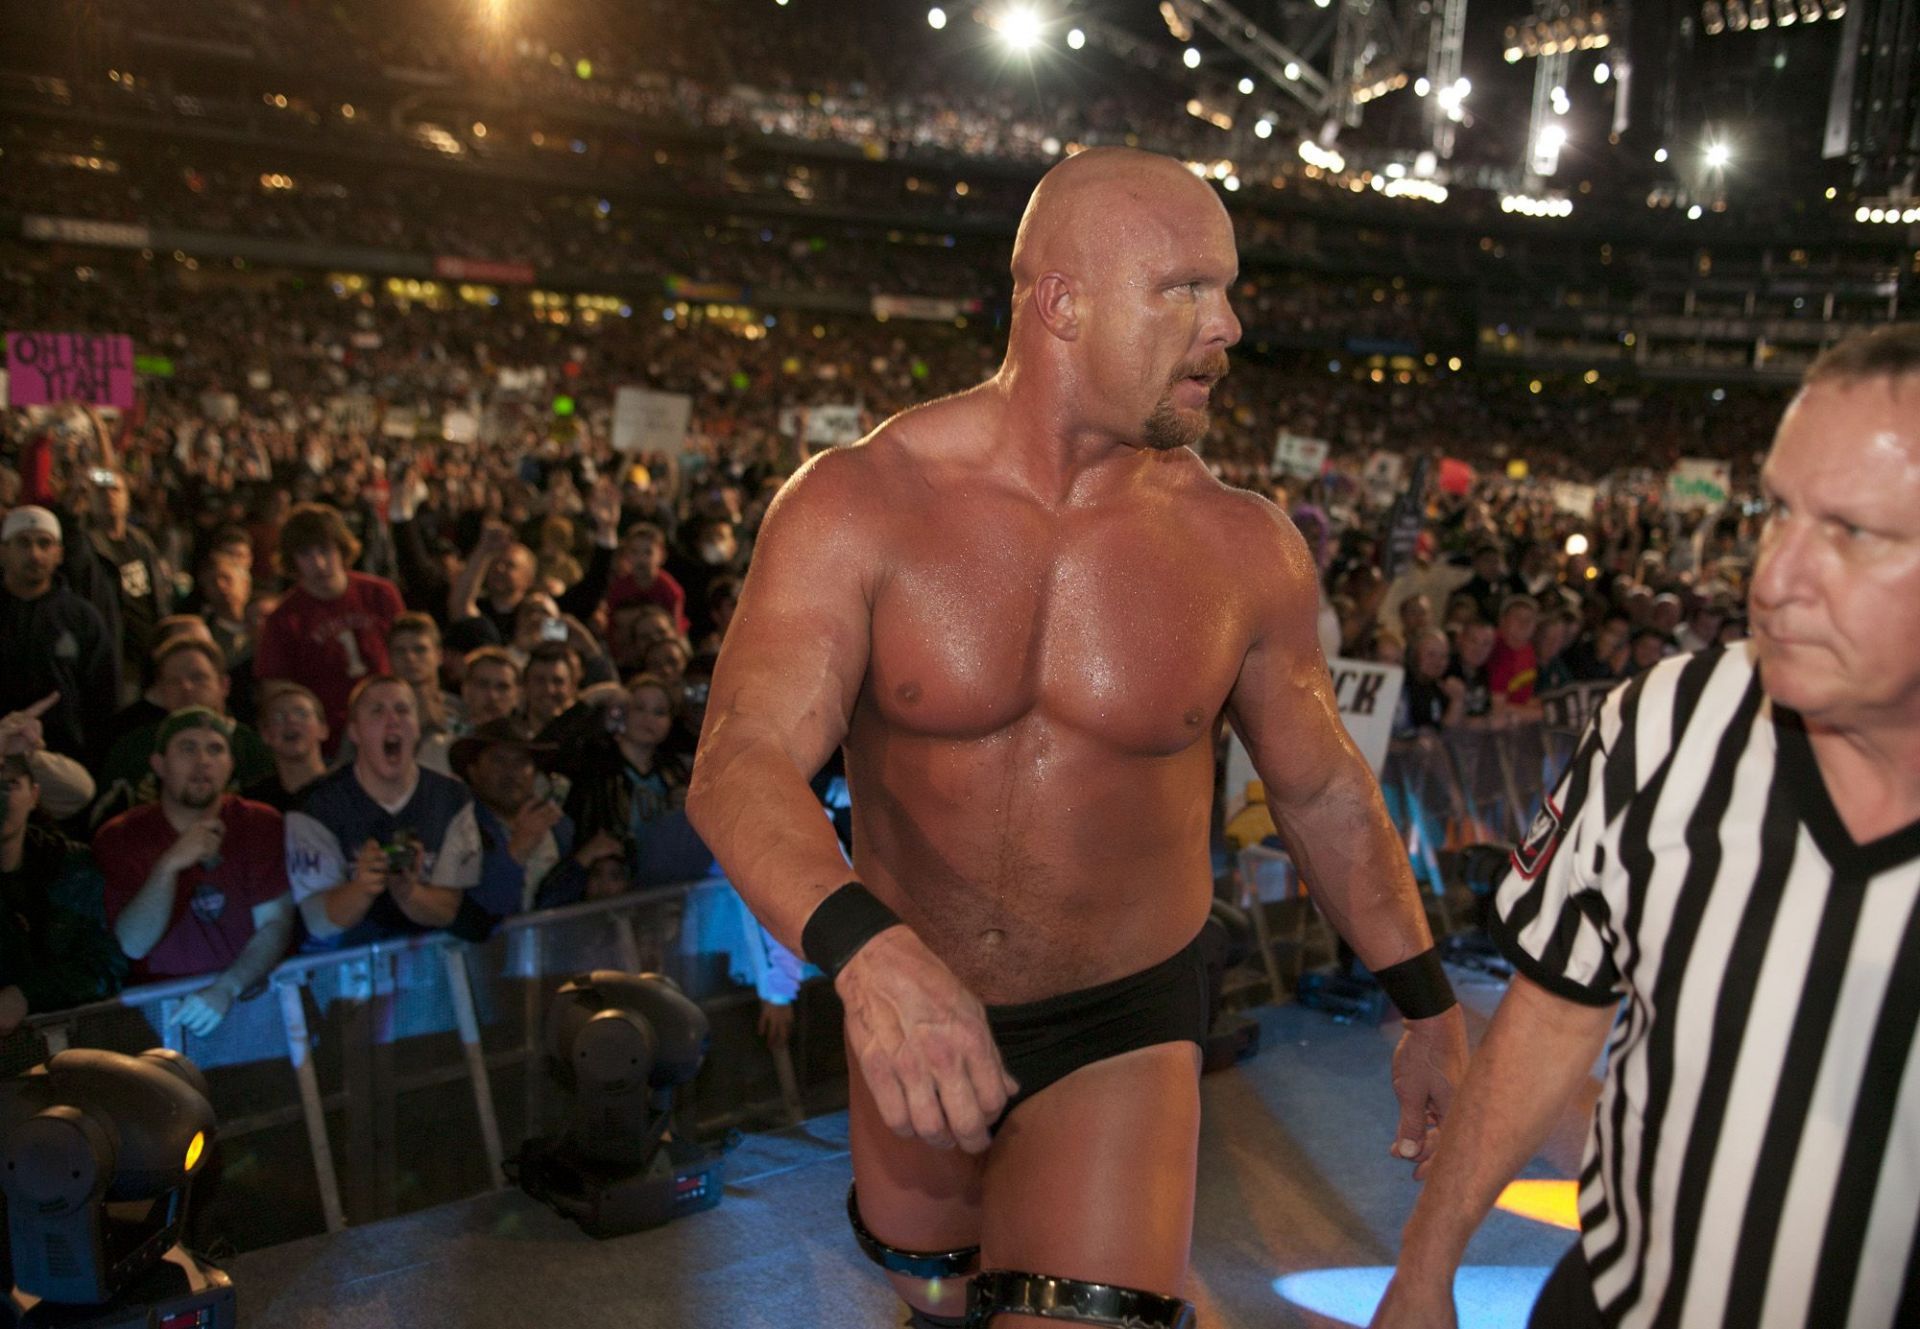 Several WWE superstars have walked out of the company and returned, including Stone Cold Steve Austin